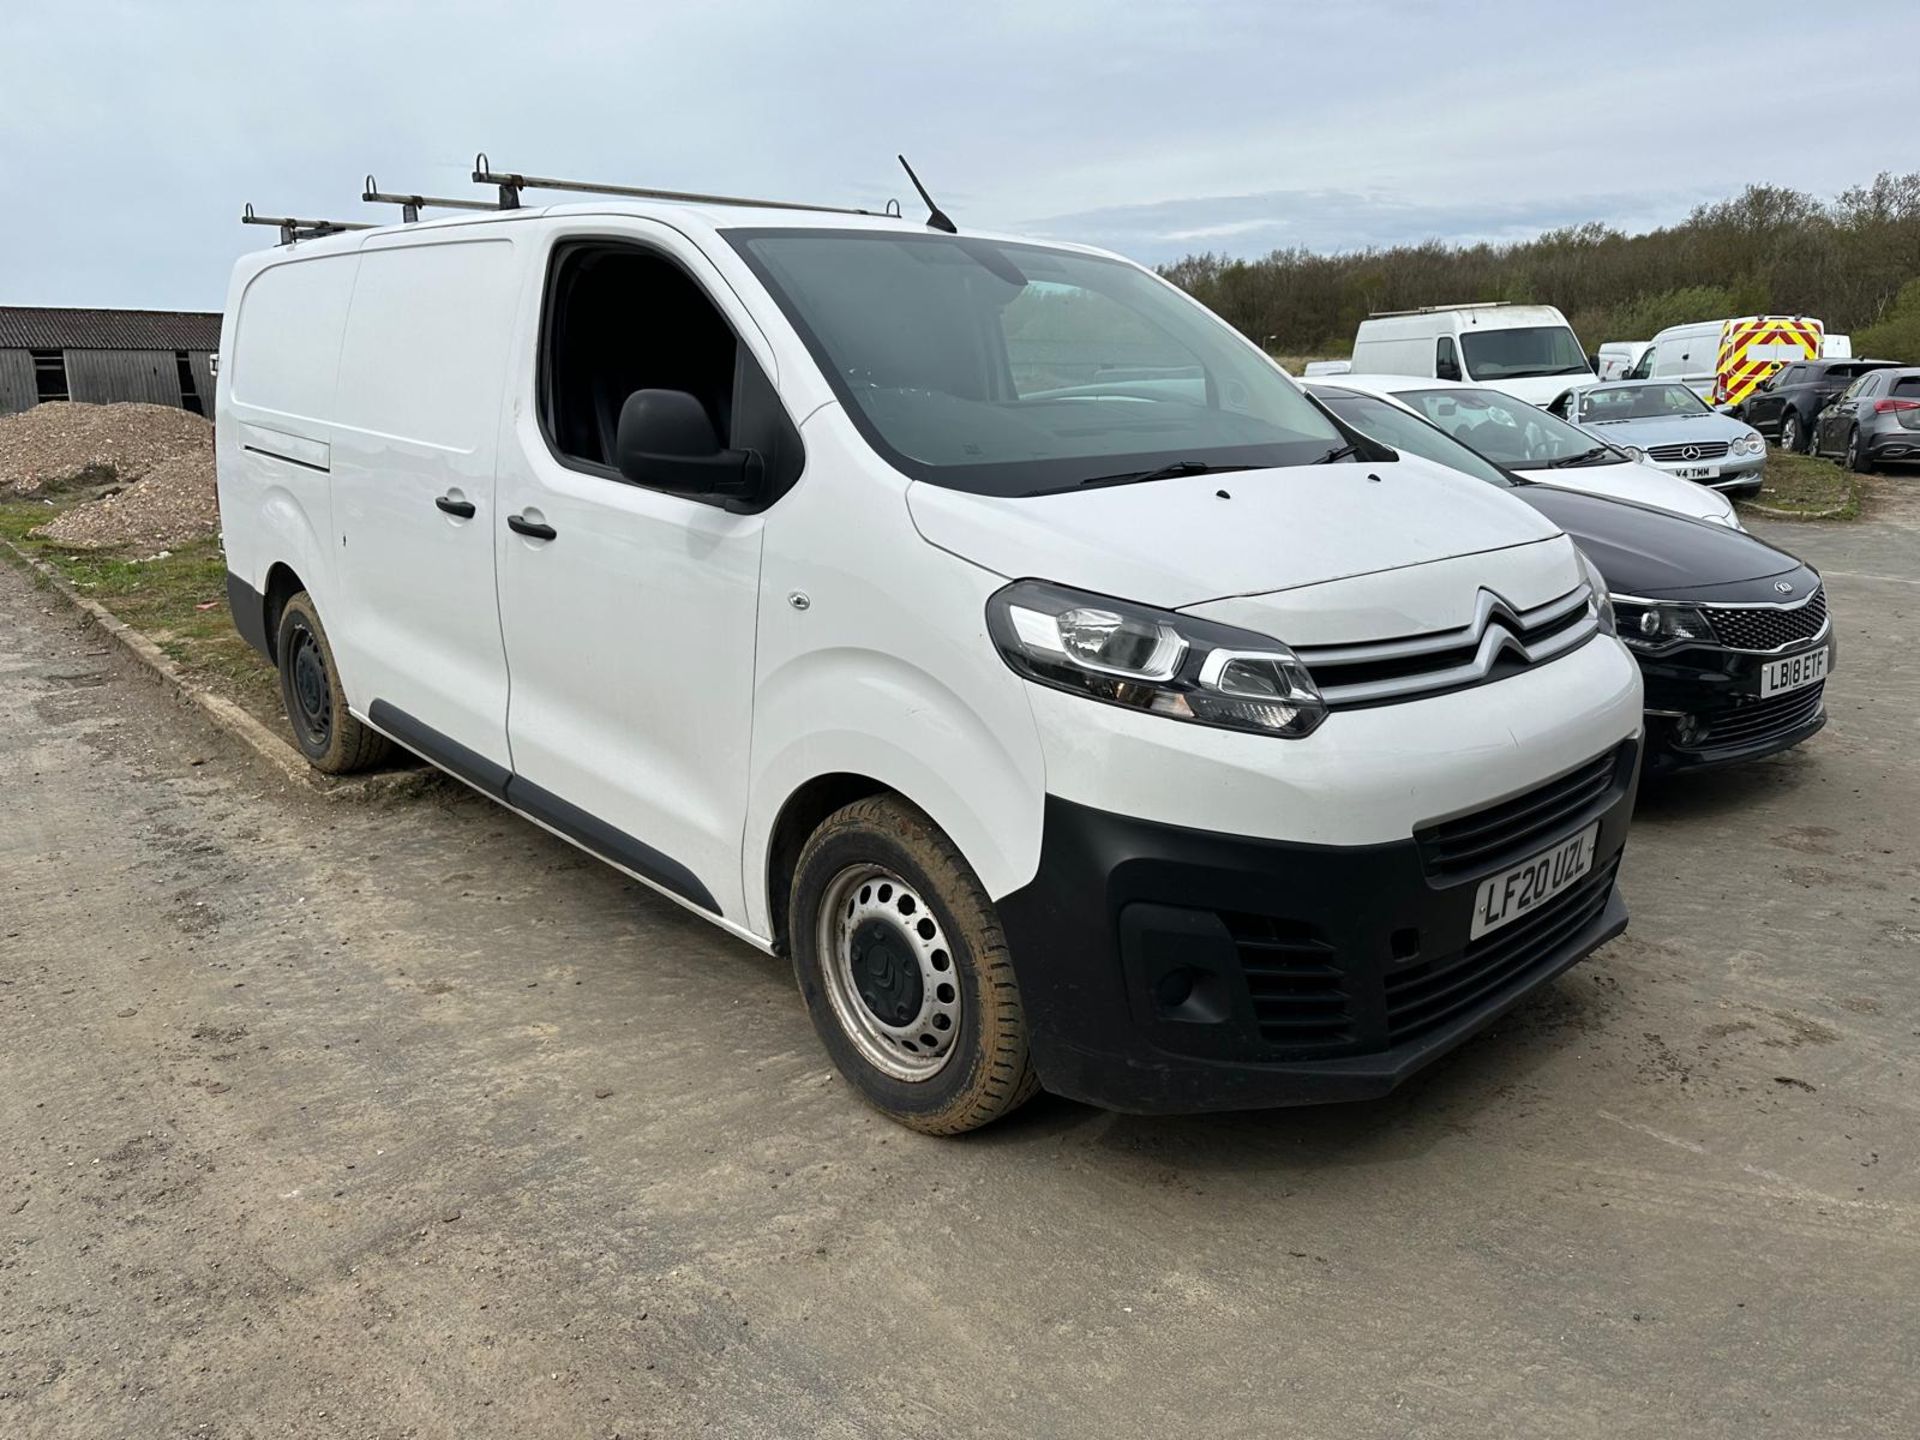 2020 20 CITROEN DISPATCH PANEL VAN - 2.0 6 SPEED - 111K MILES - AIR CON - PLY LINED - EURO 6  - Image 2 of 10